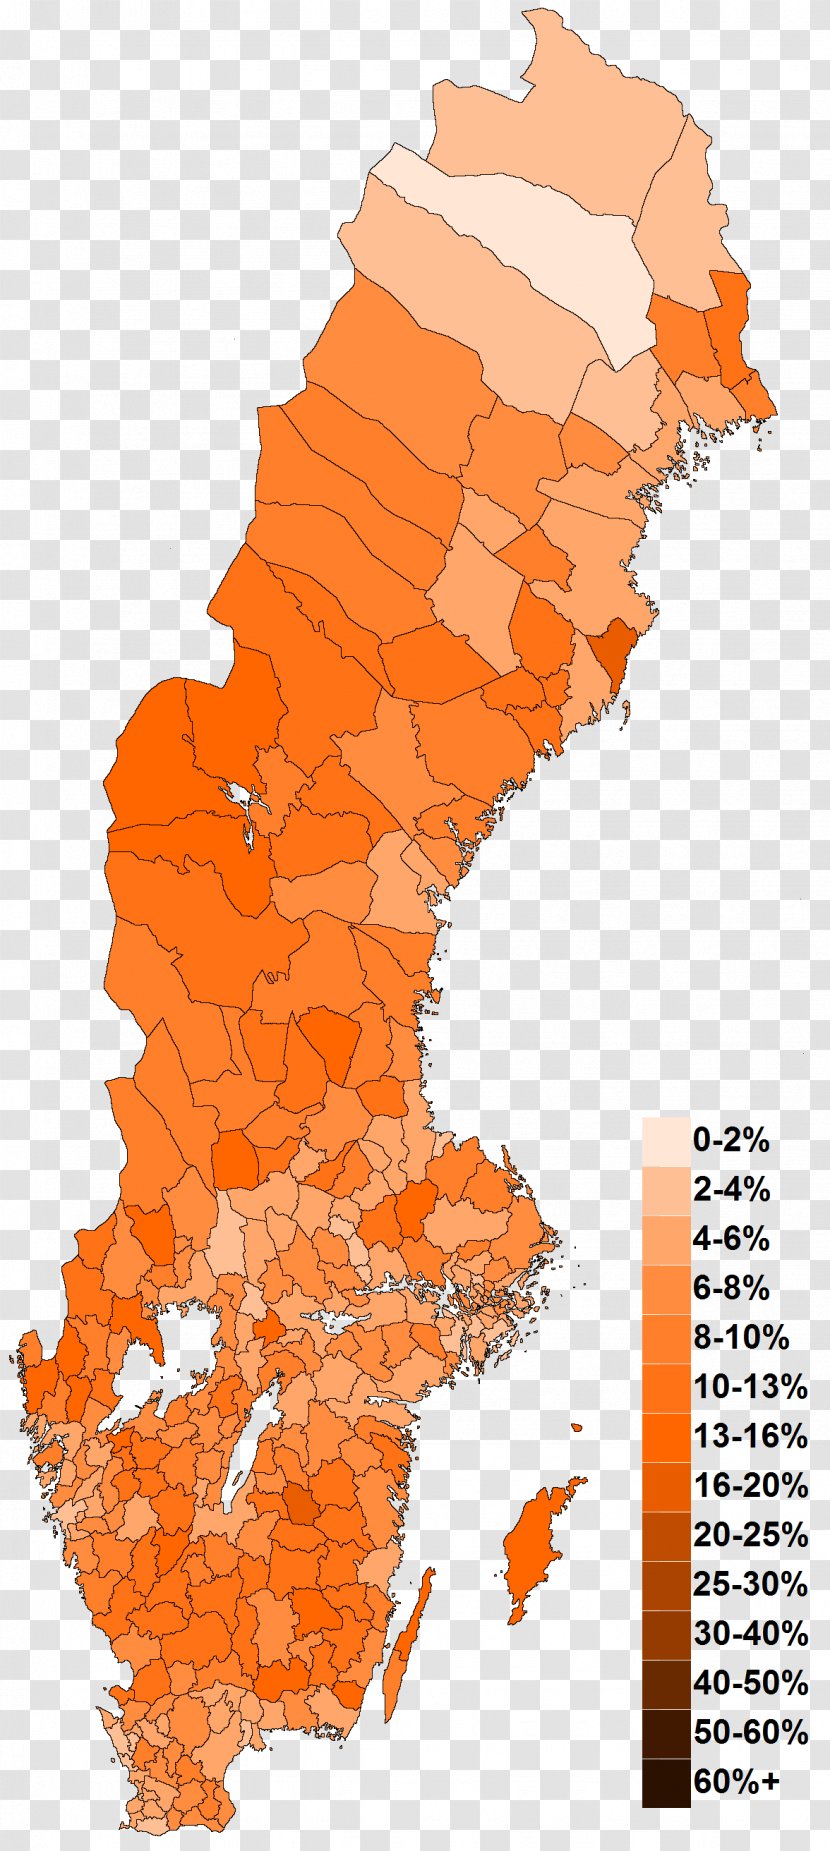 Sweden Democrats Swedish General Election, 1985 1994 Elections In - Election - Rural Towns Germany Transparent PNG